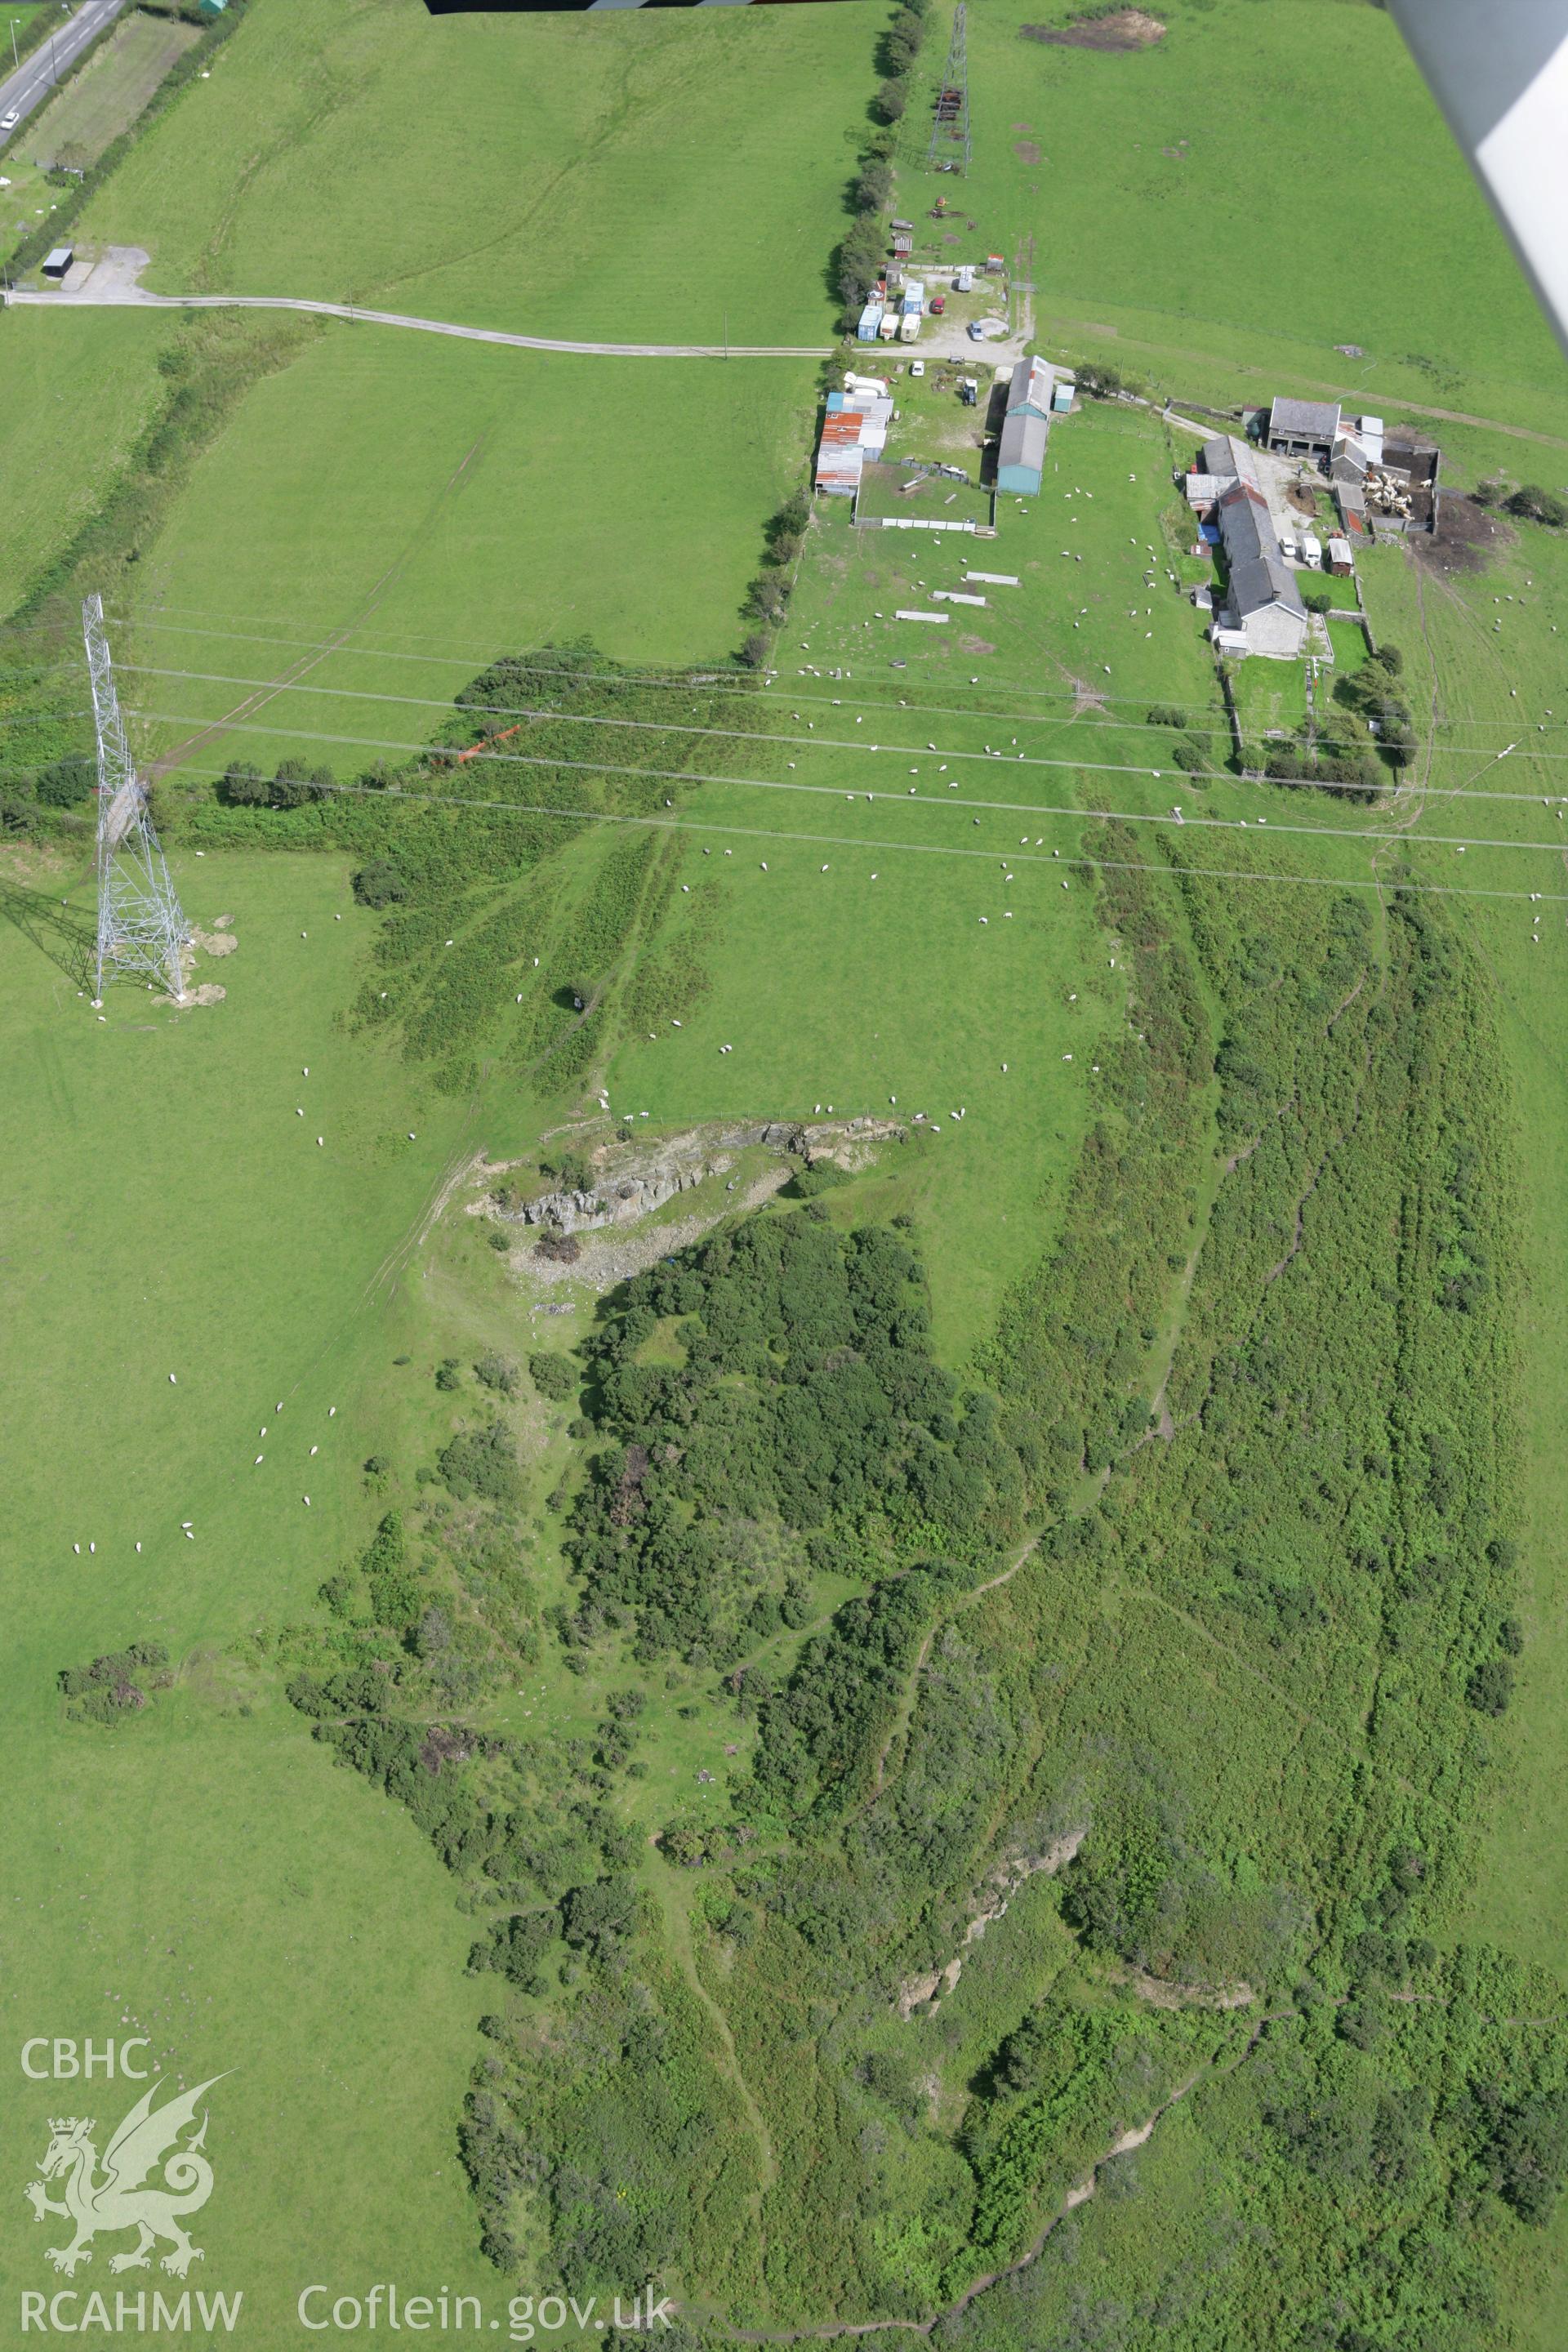 RCAHMW colour oblique aerial photograph of Pen-y-Castell. Taken on 30 July 2007 by Toby Driver